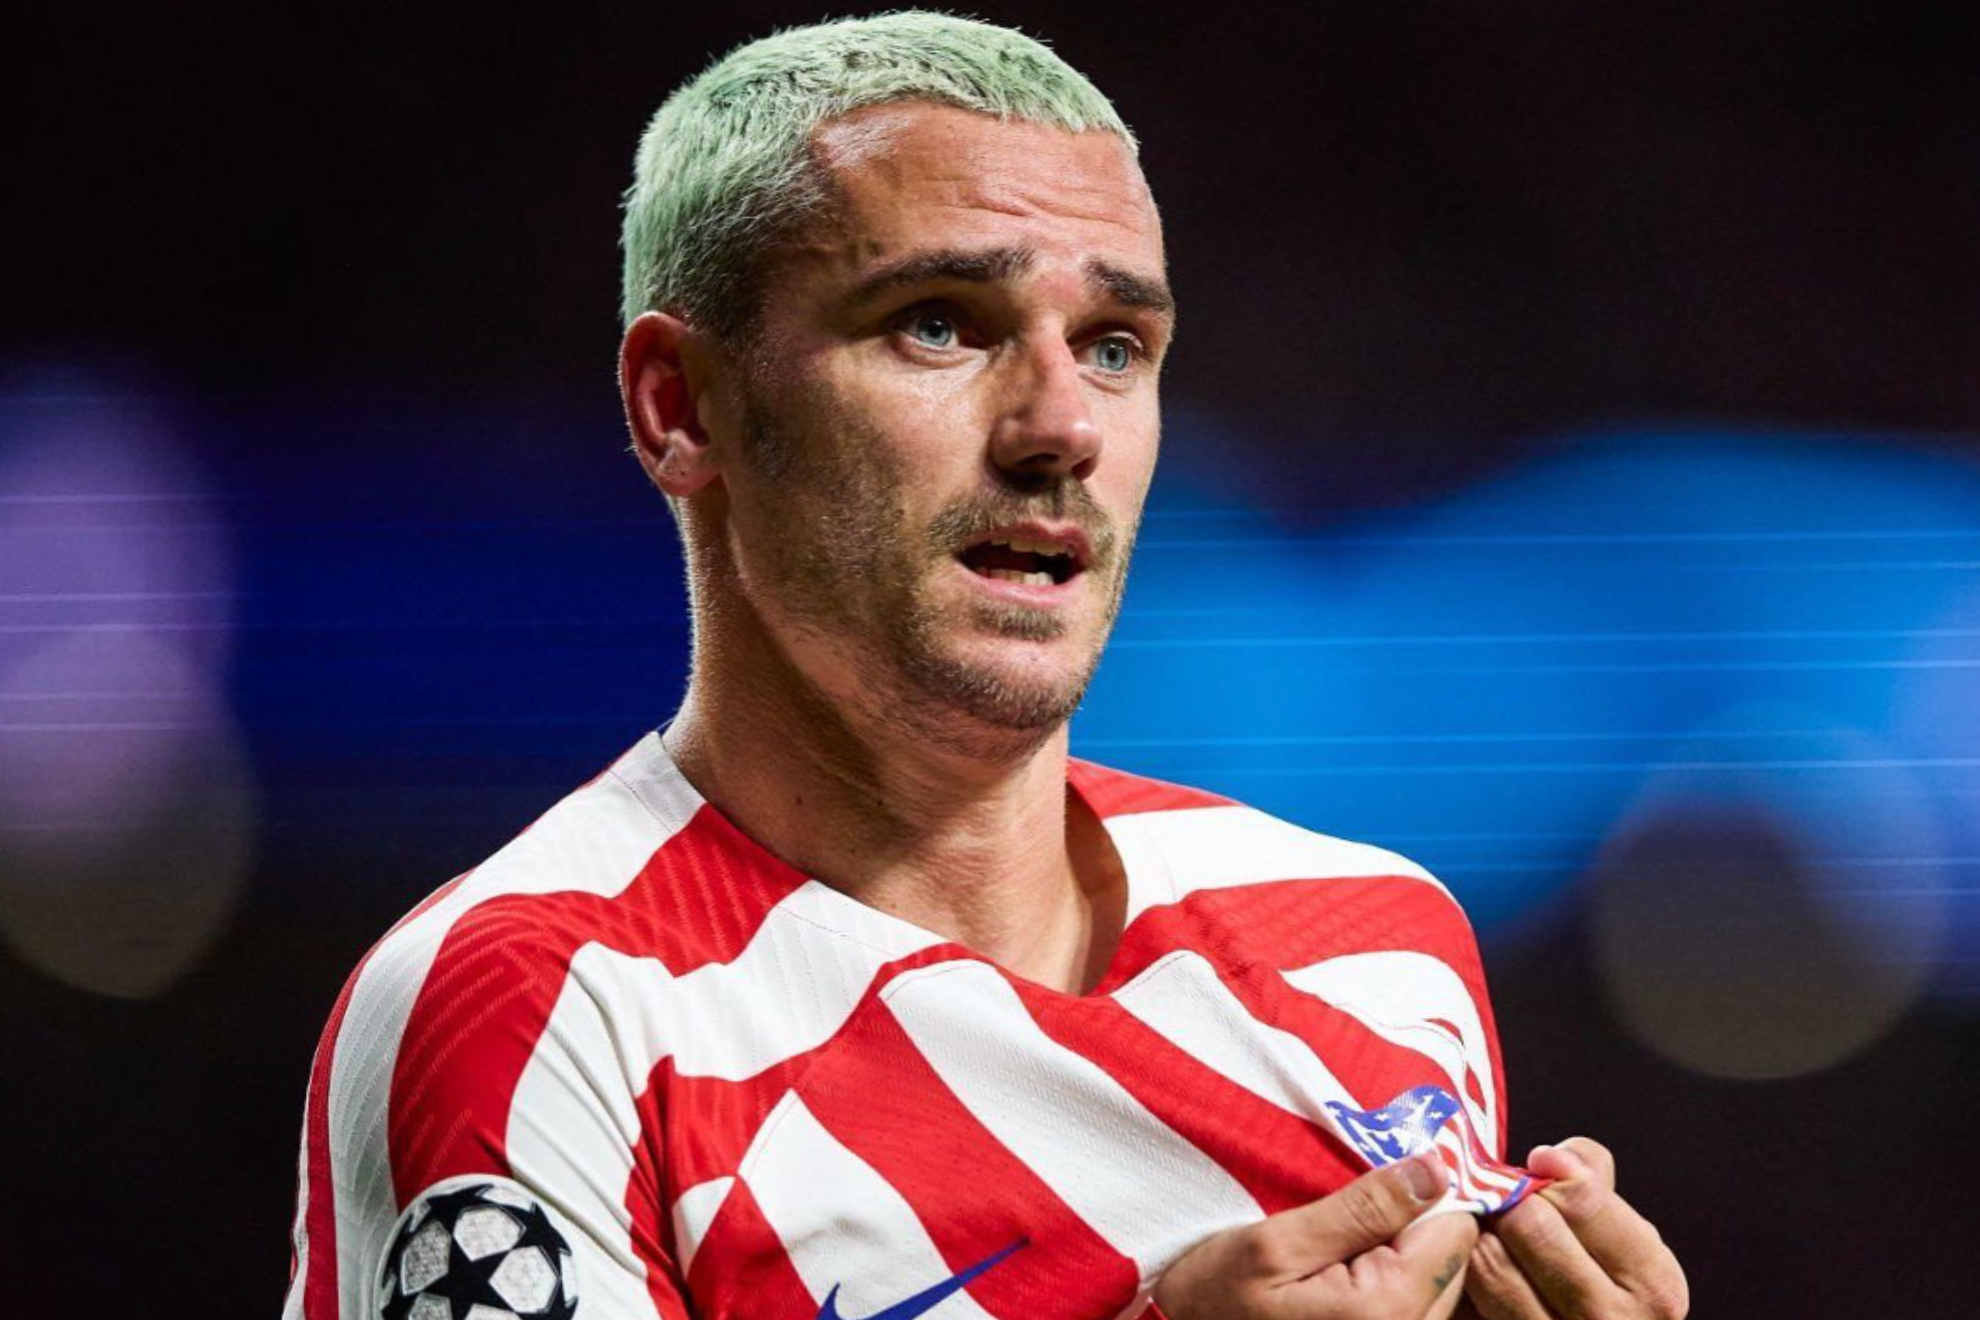 World Cup winner Griezmann would be among the highest-profile signings ever to play in MLS.